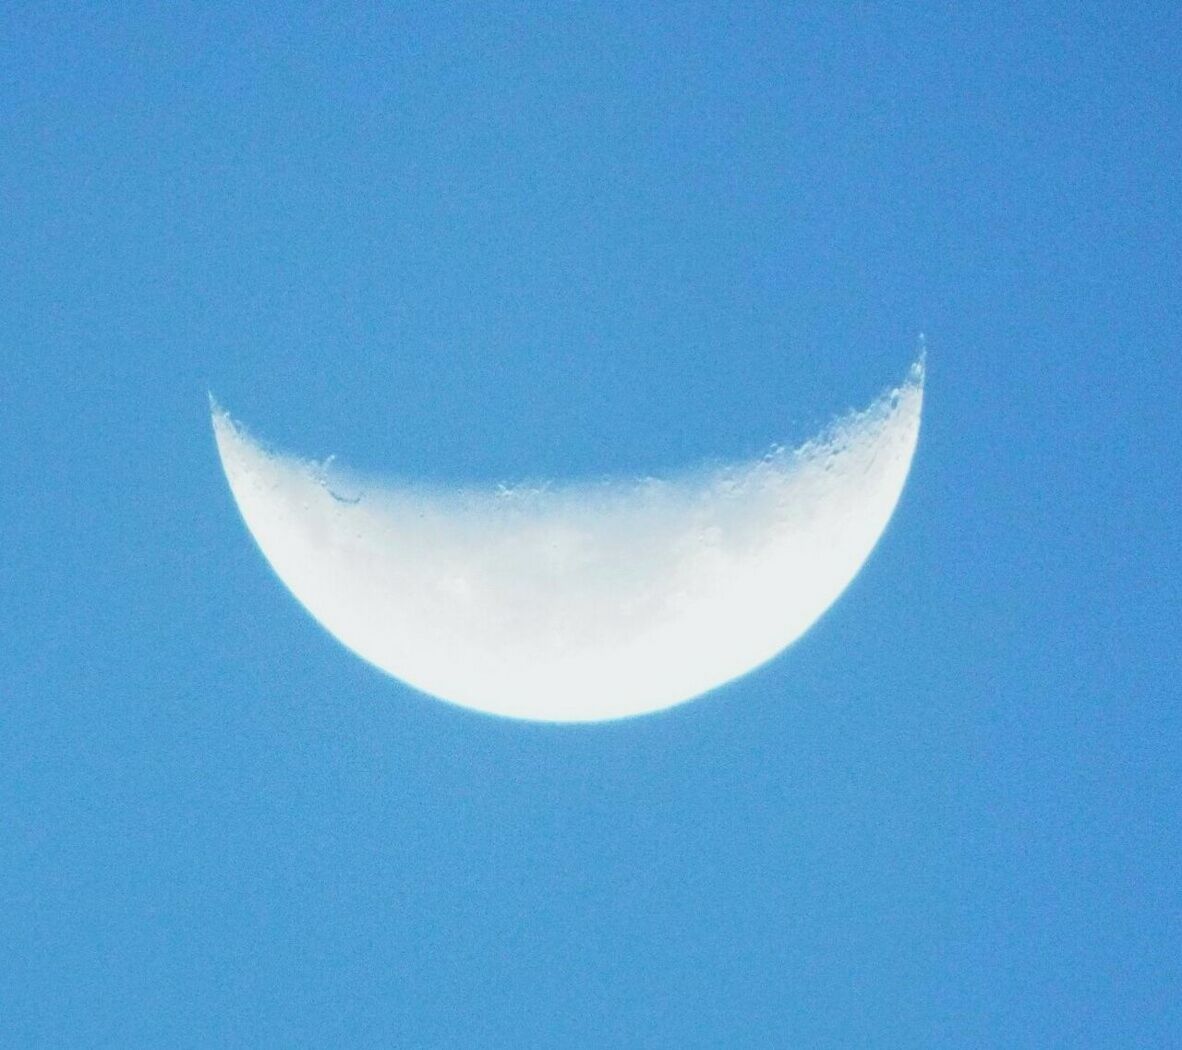 LOW ANGLE VIEW OF HALF MOON AGAINST BLUE SKY